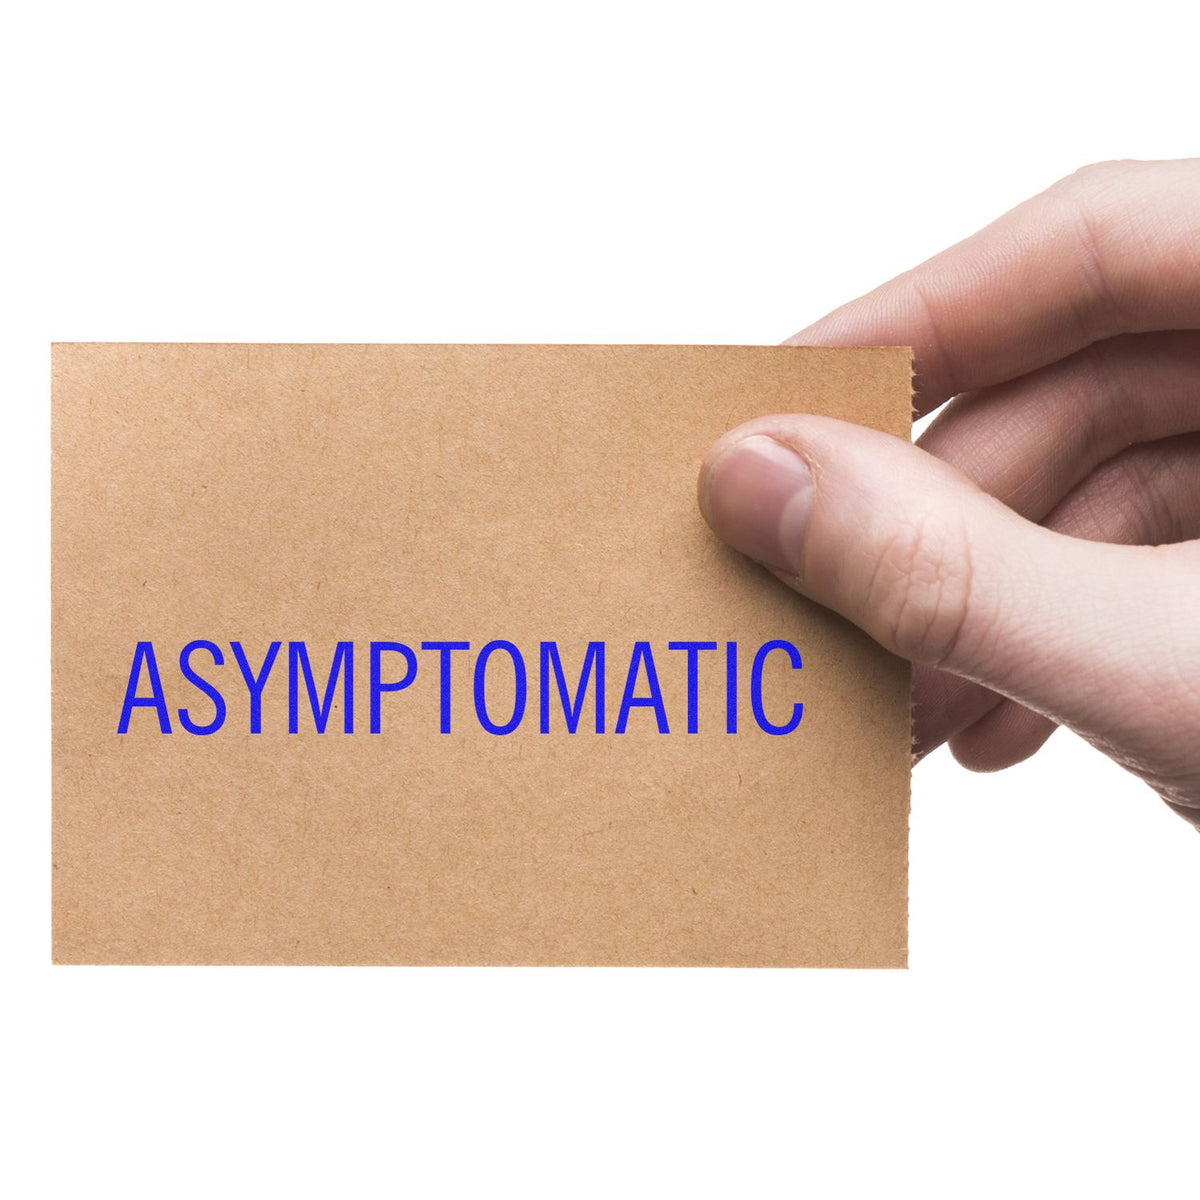 Large Asymptomatic Rubber Stamp In Use Photo